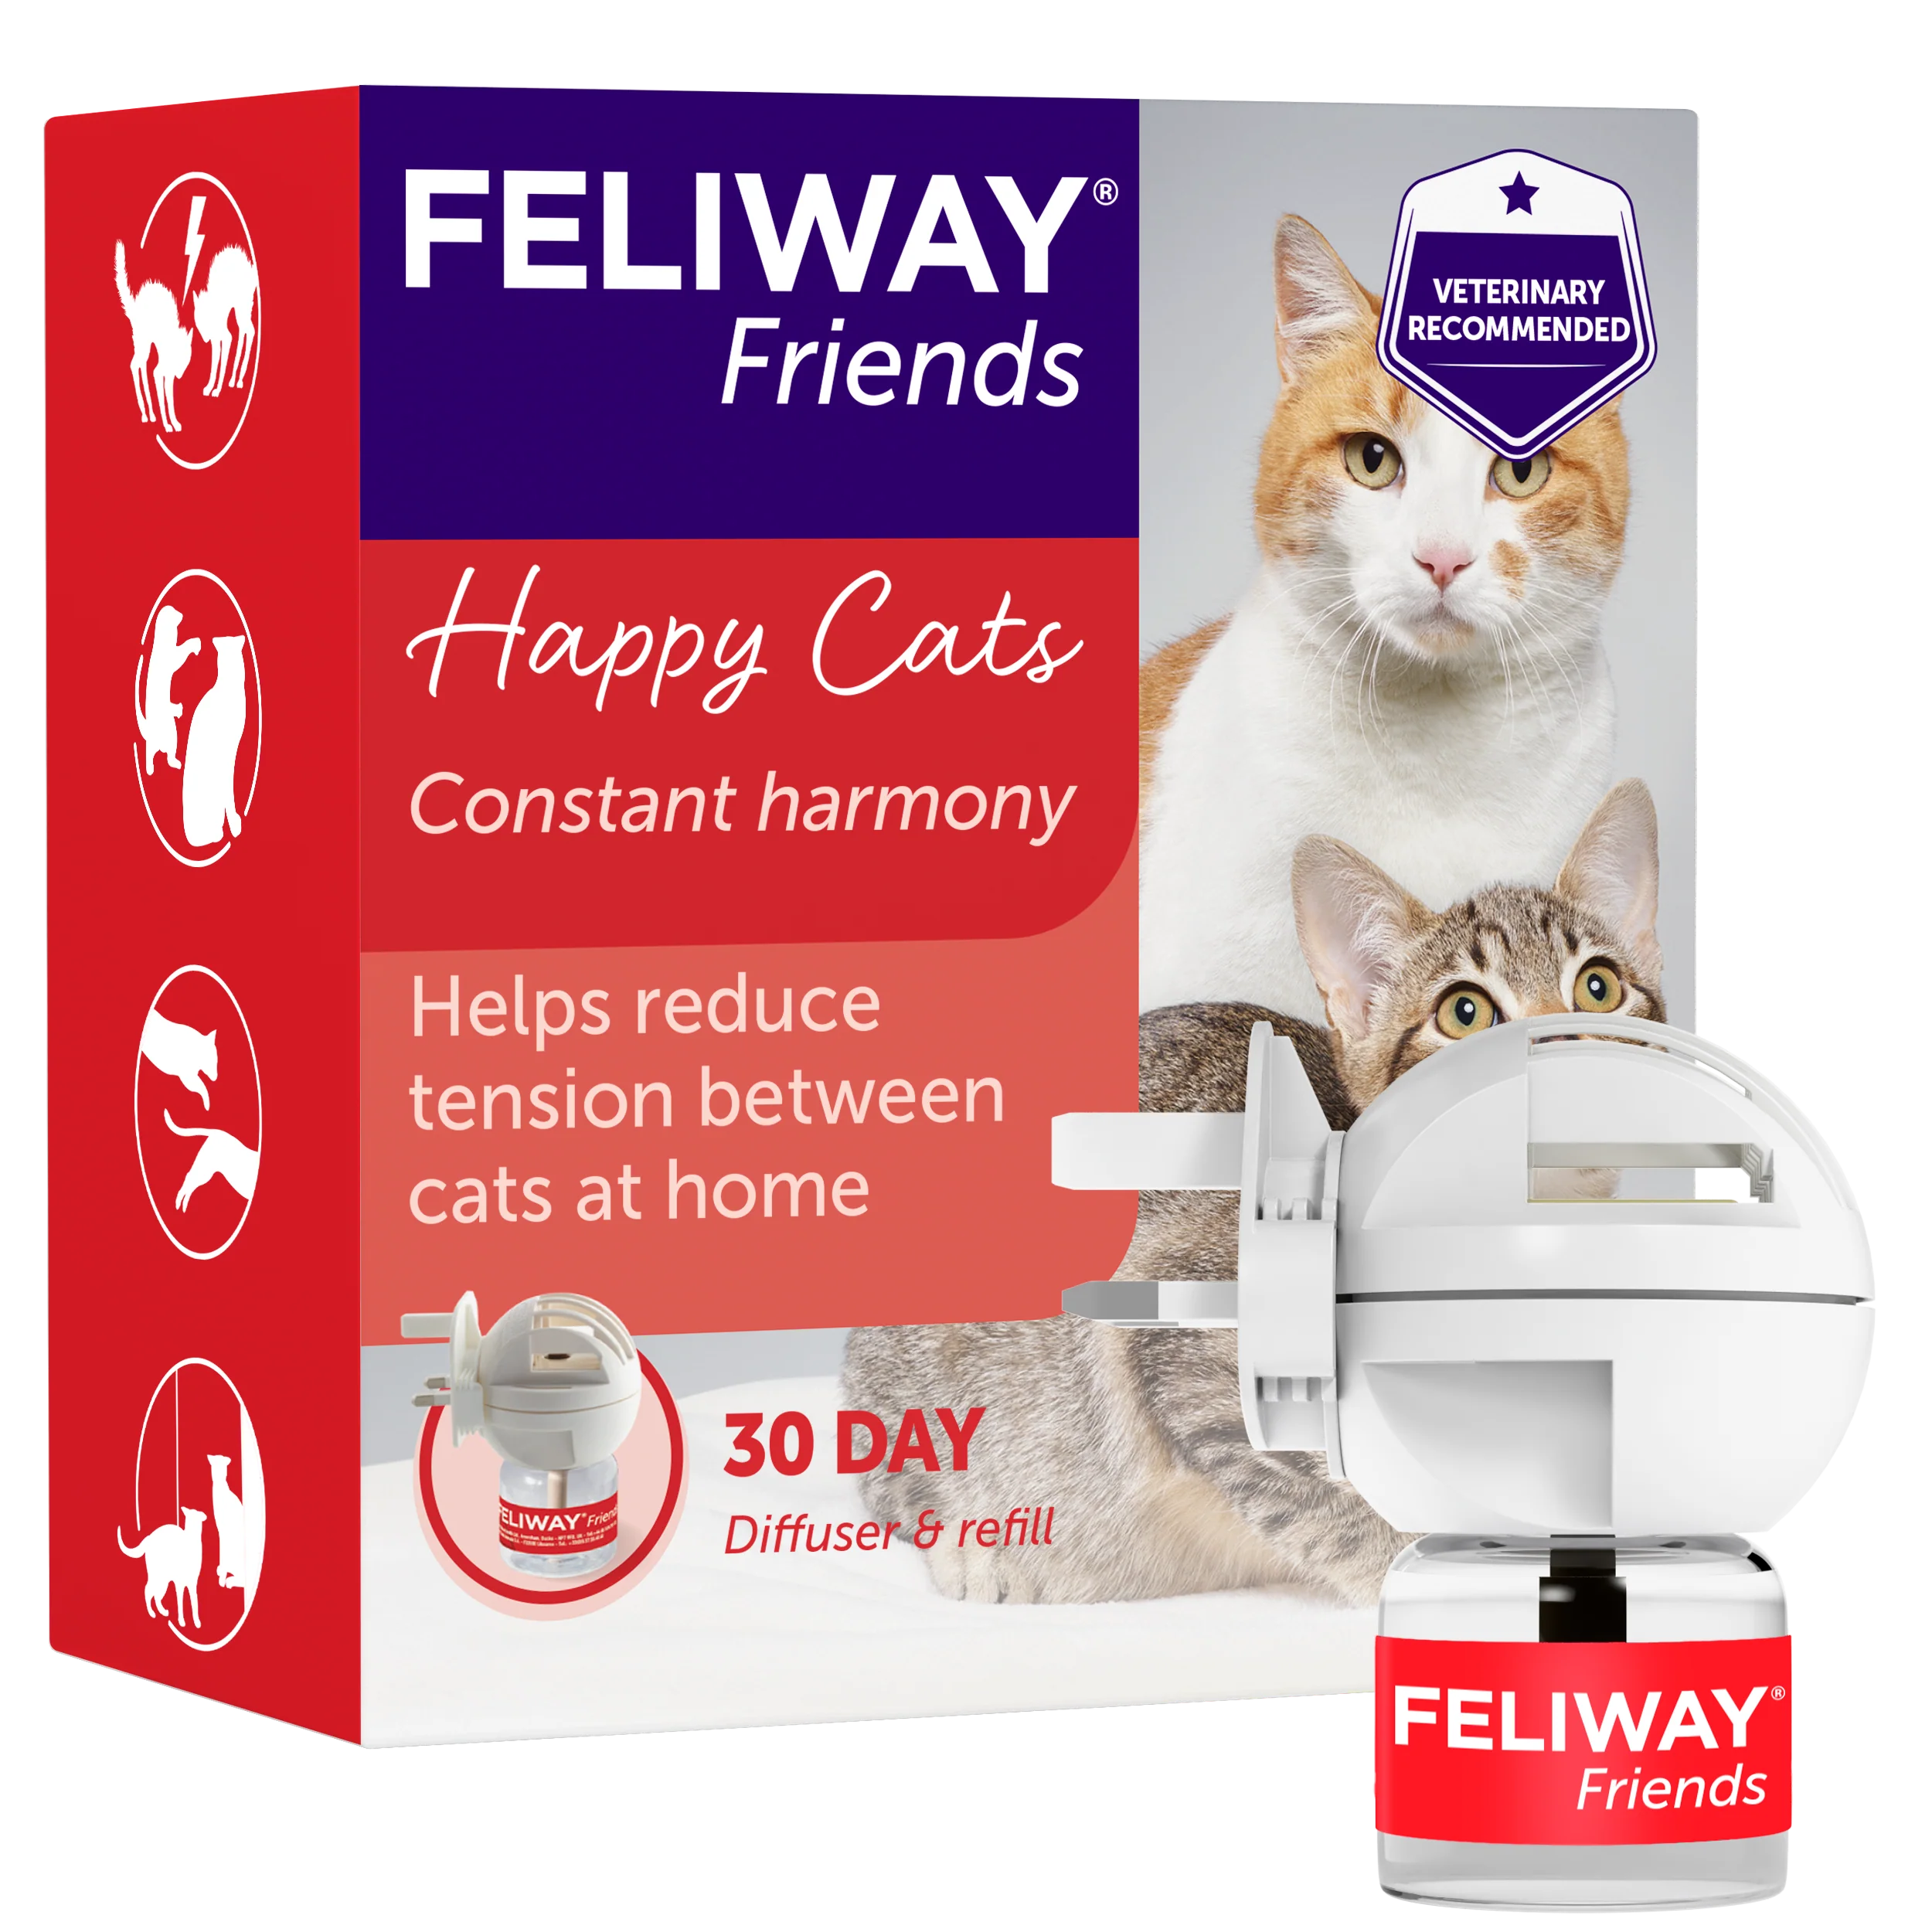 A BRAND NEW FELIWAY!, A BRAND NEW FELIWAY! Introducing FELIWAY Optimum  which is proven to calm cats better than ever before! Enhances serenity and  helps avoid all common, By VioVet